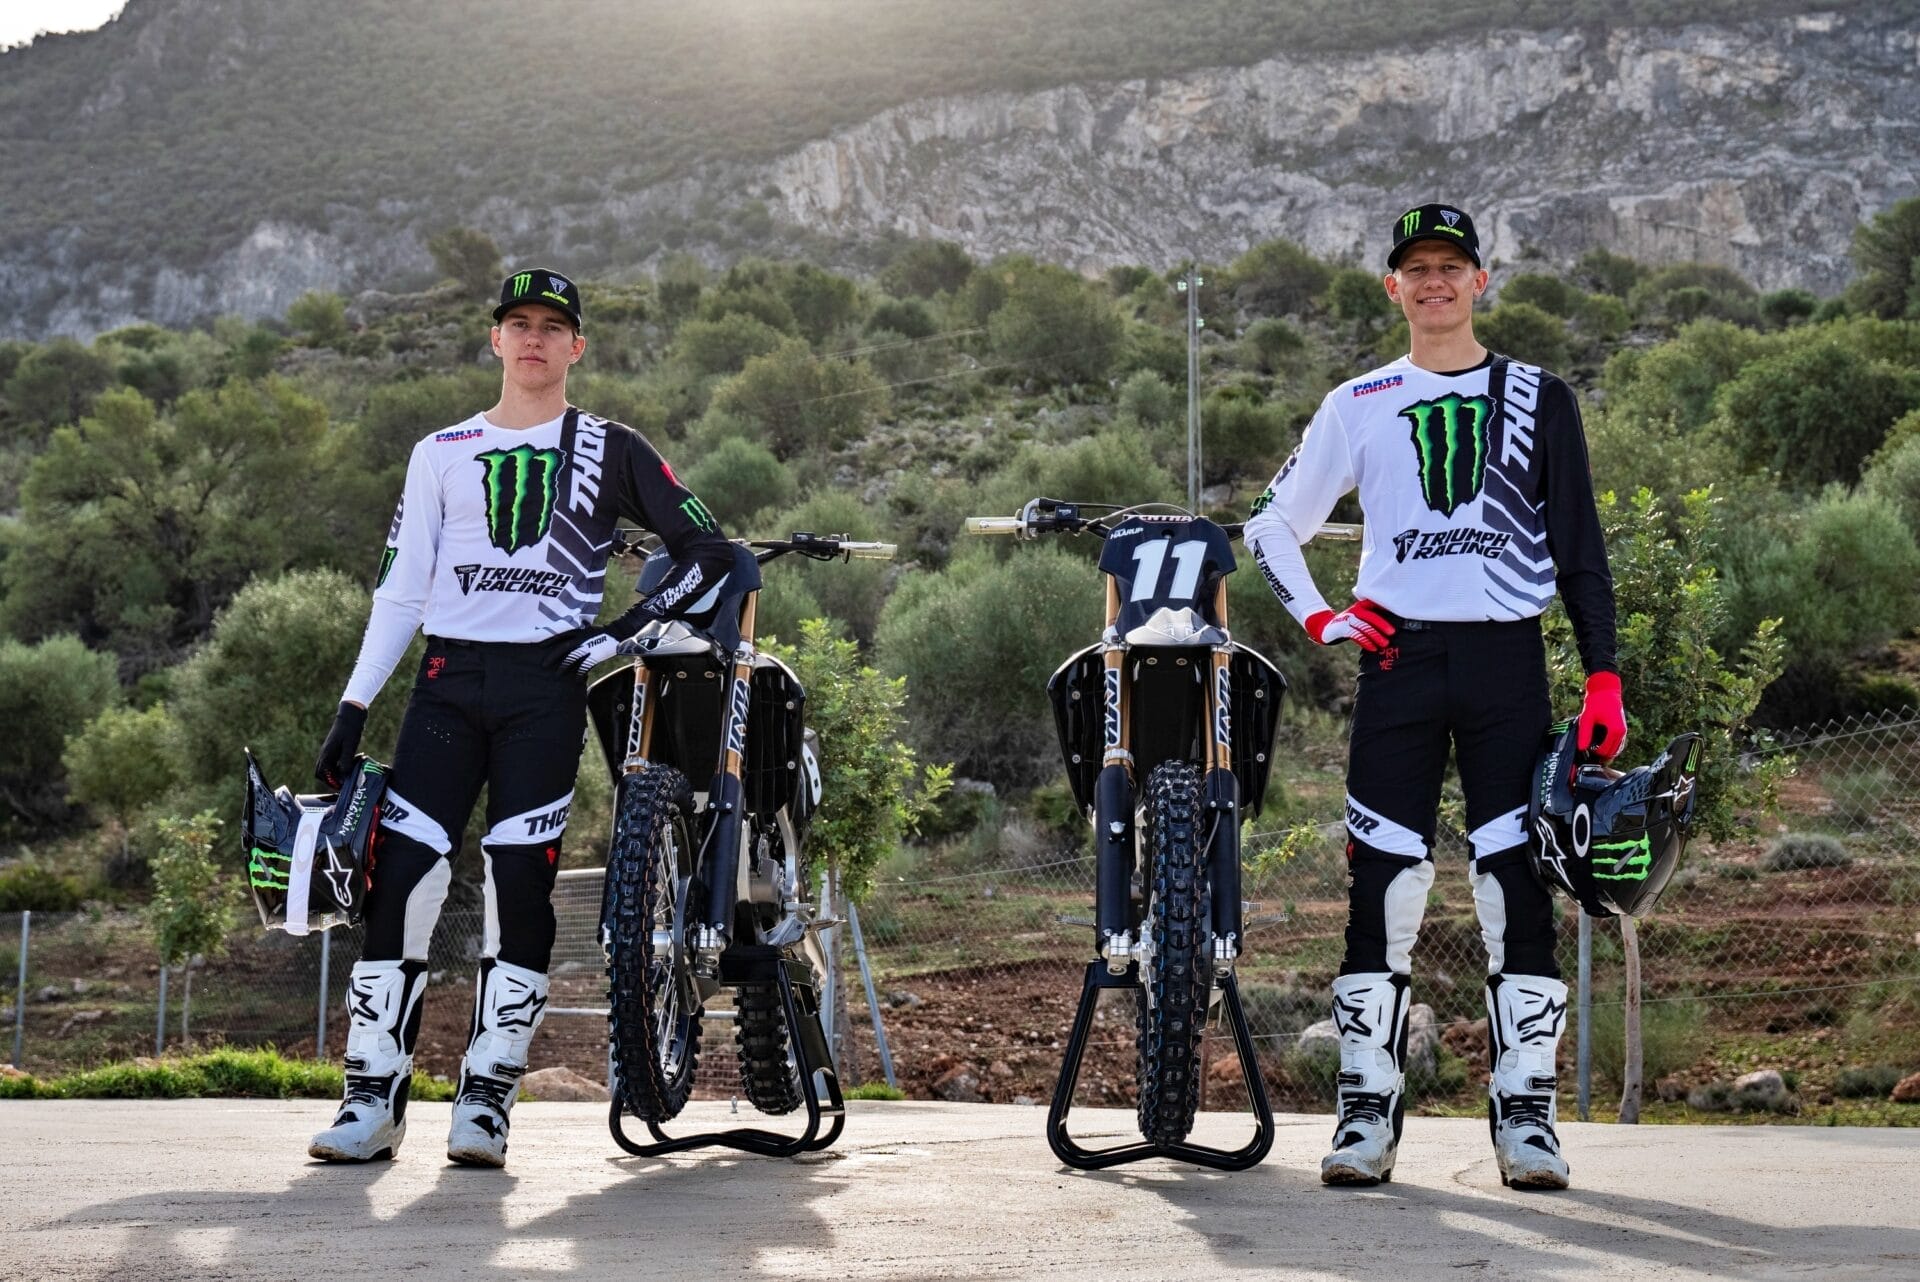 Triumph’s entry into the Motocross World Championship: Rider line-up and future plans